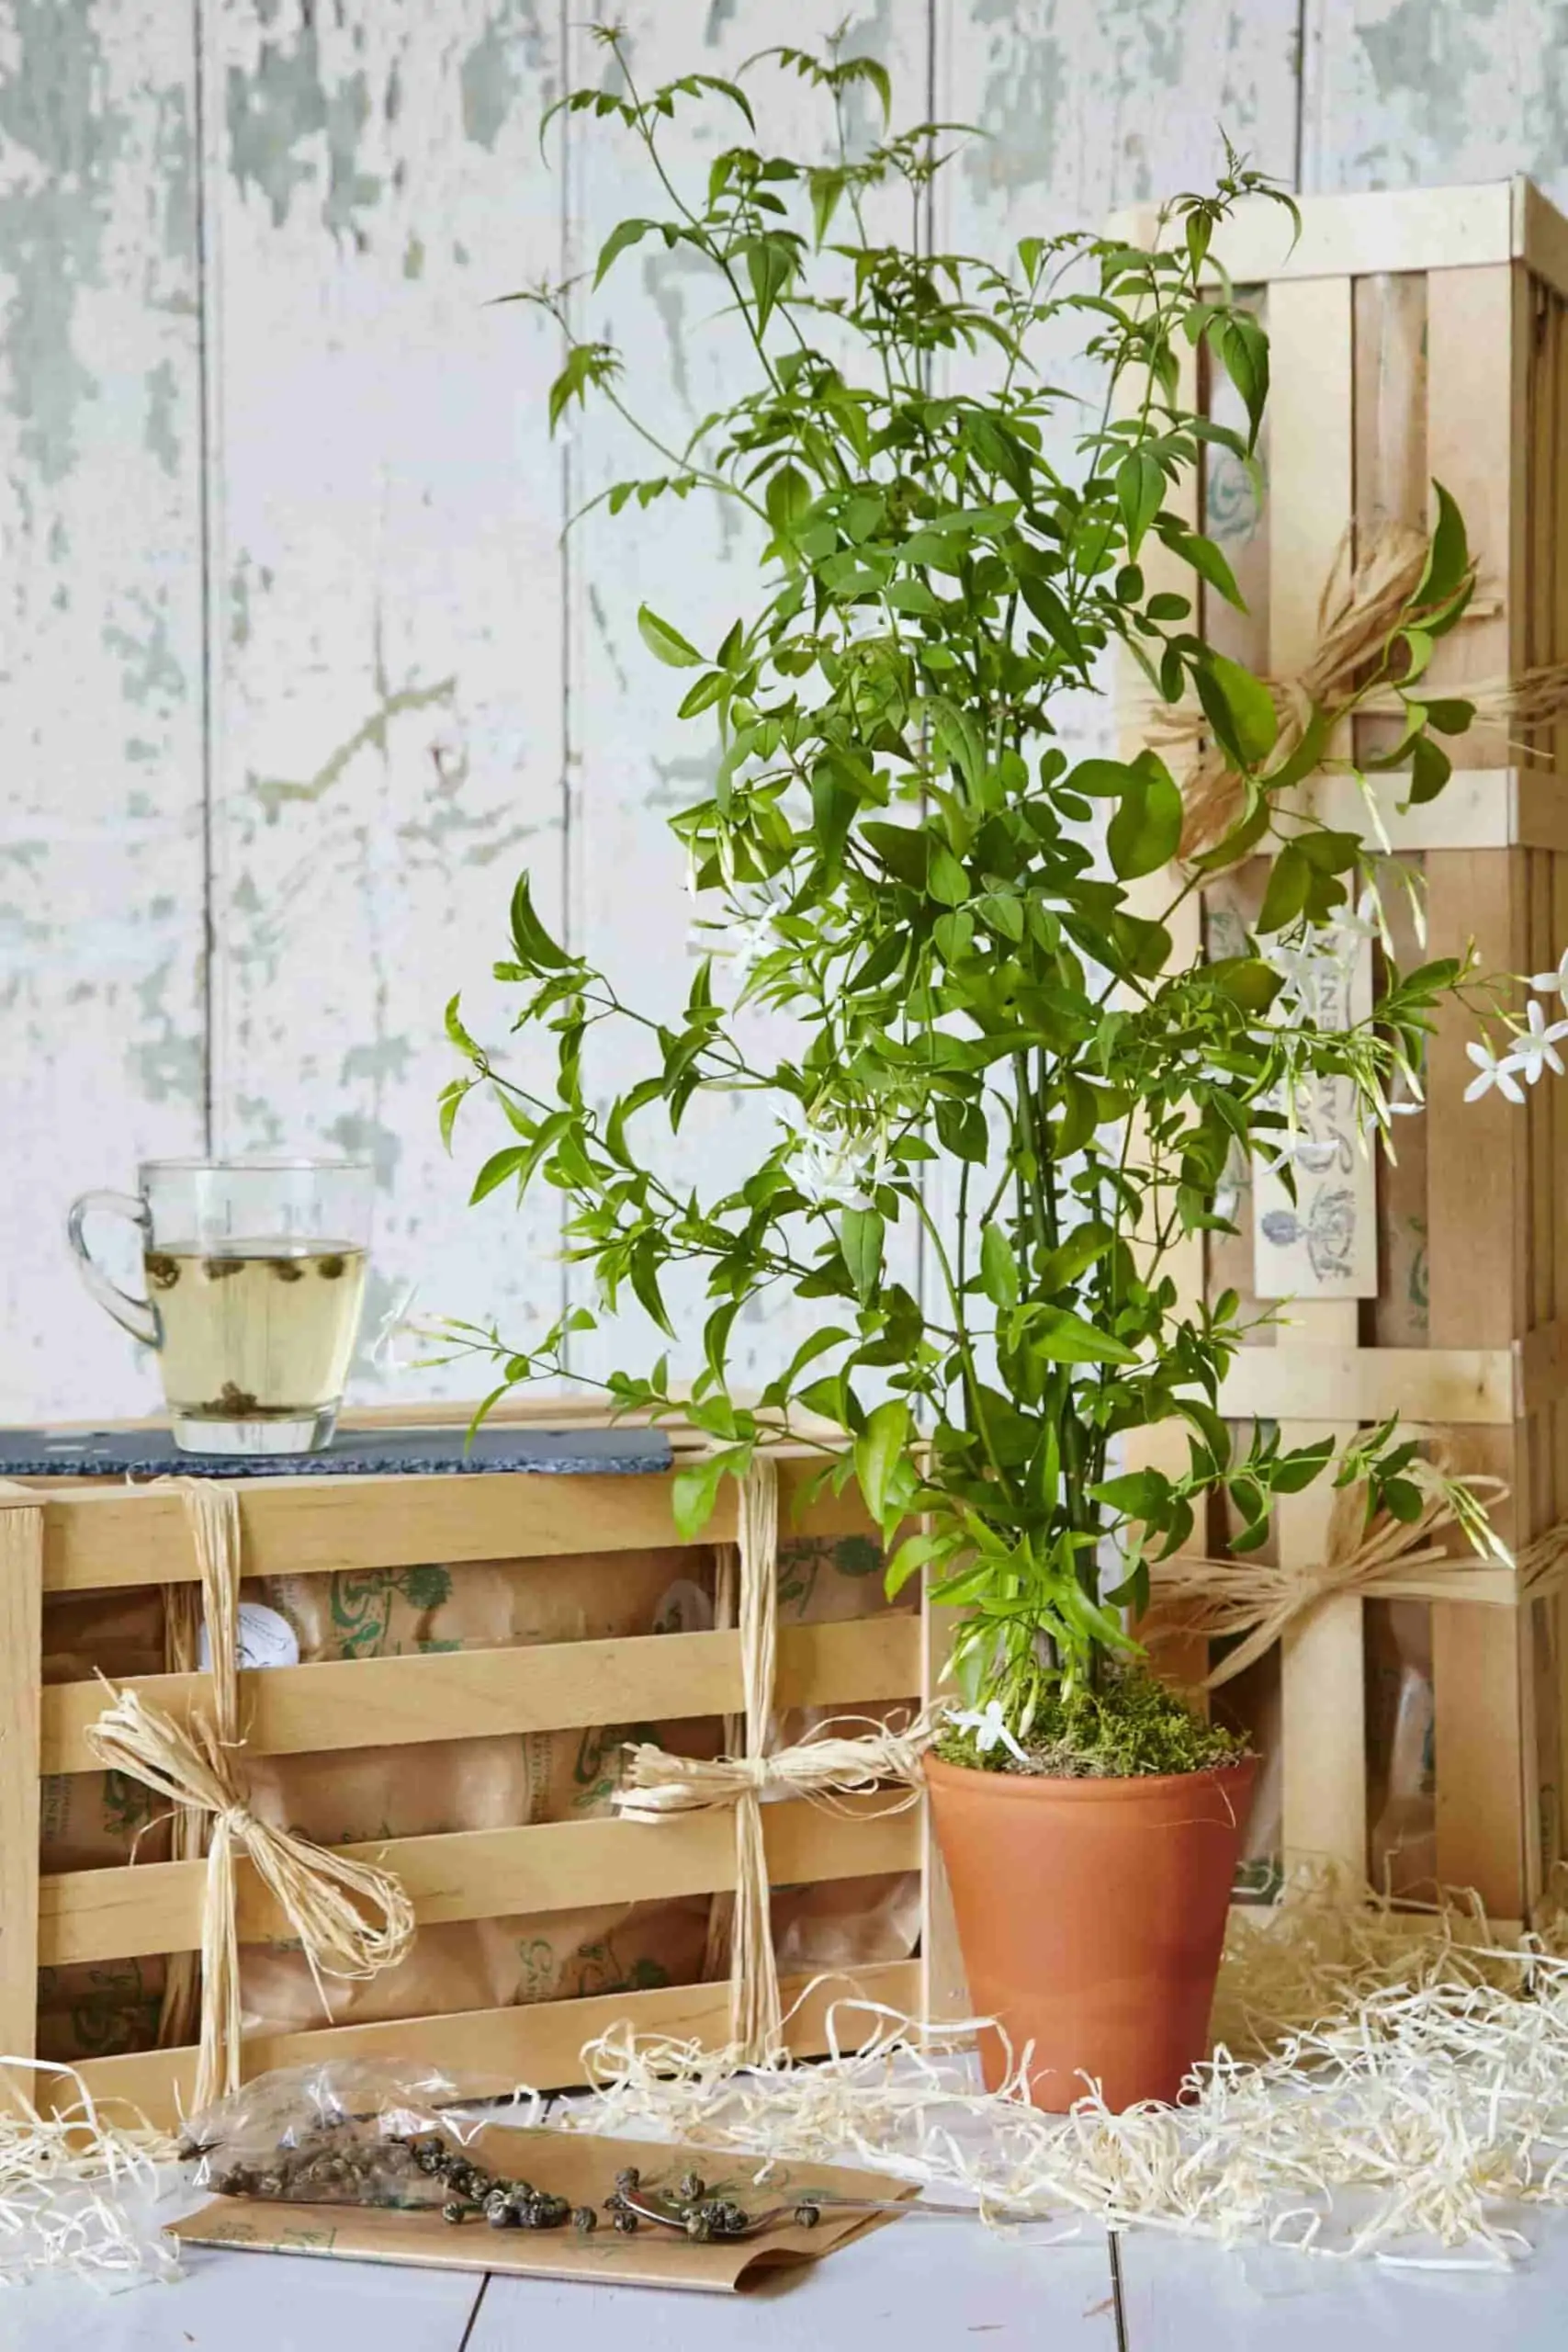 aesthetic indoor plant with wooden boxes in frame.